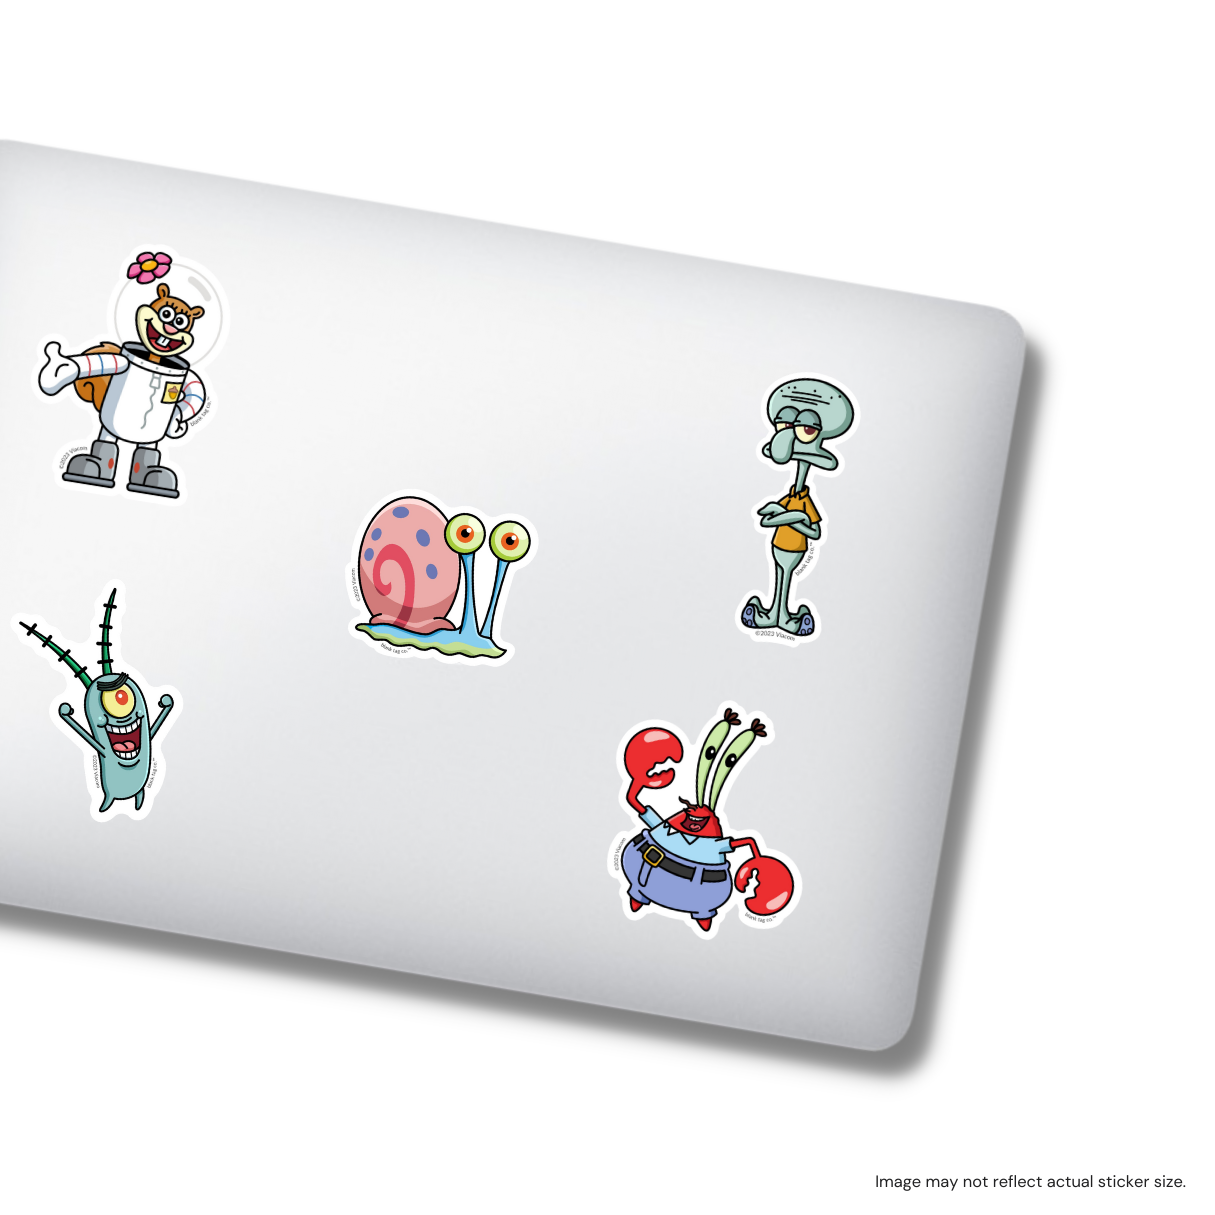 The Squidward Tentacles Sticker